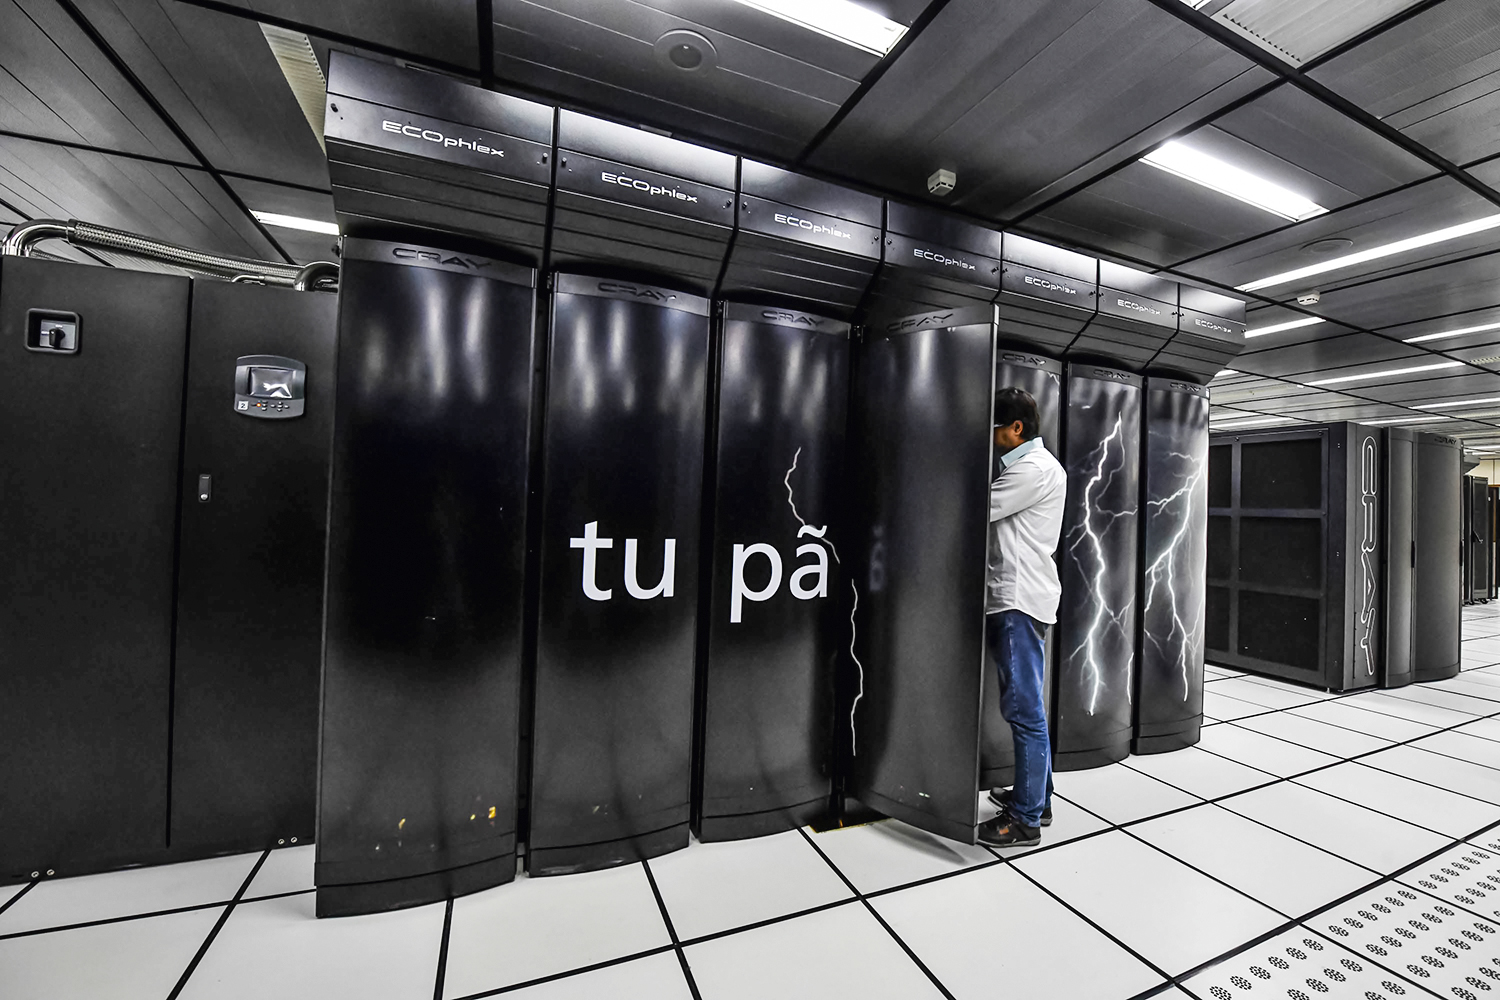 OFF AIR - Tupã Supercomputer: The device has been turned off to reduce the cost of electricity -